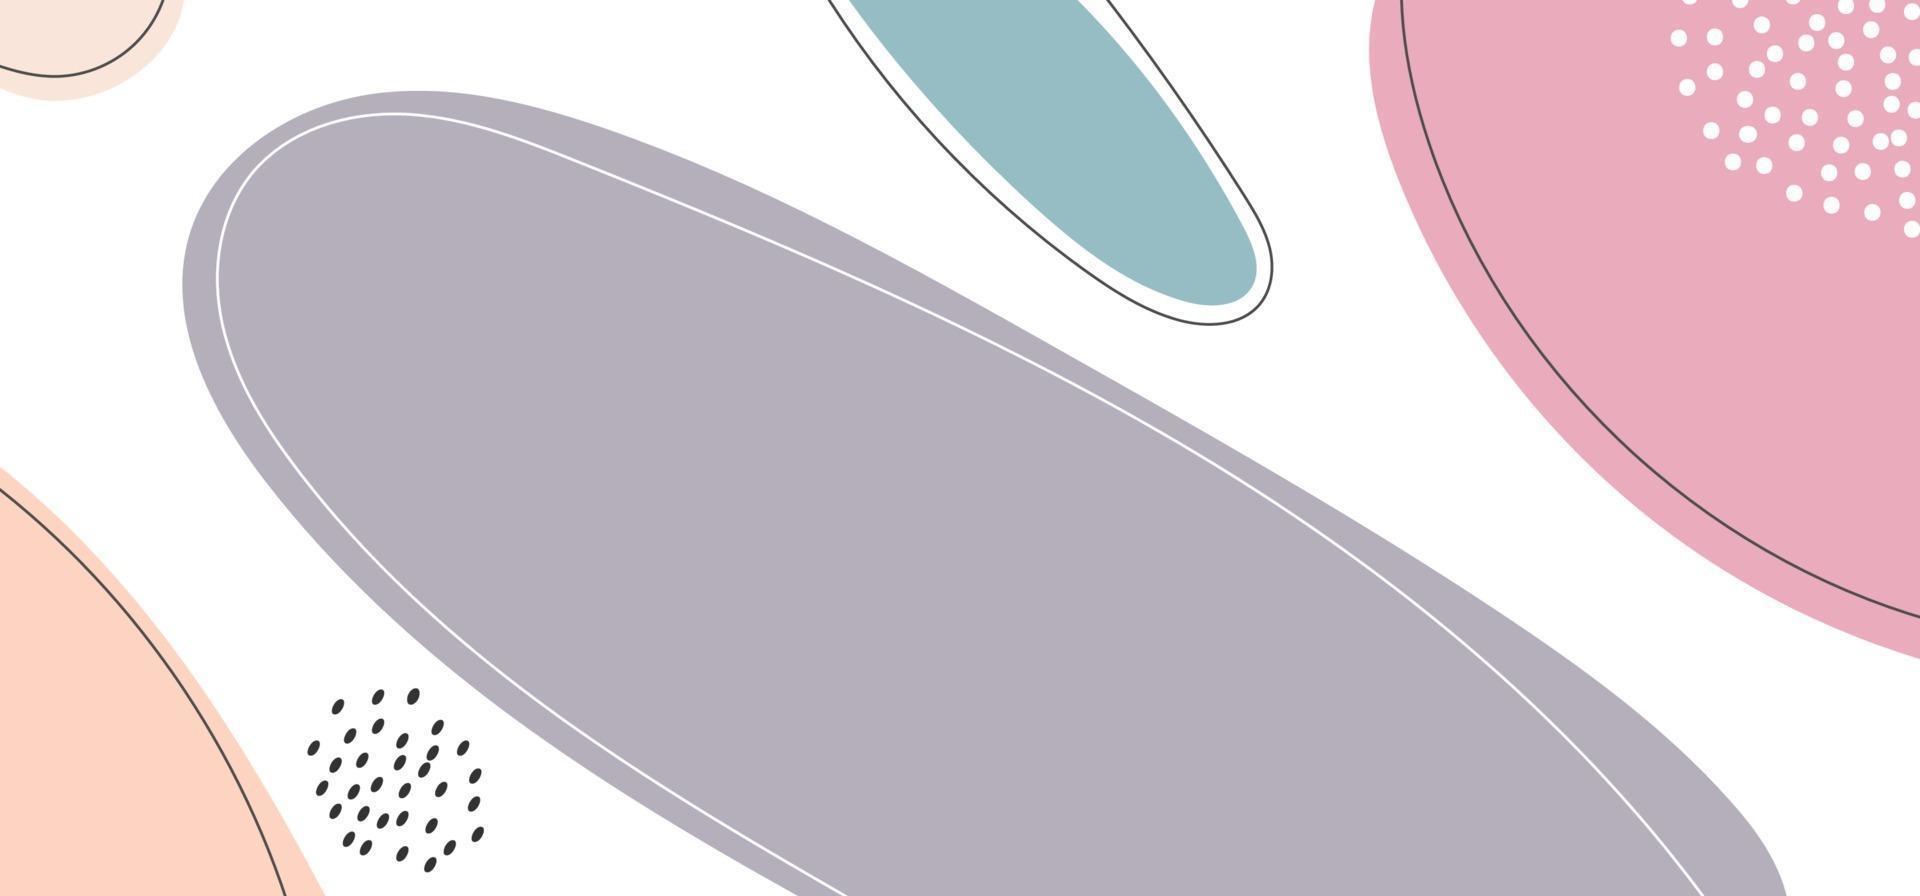 Abstract hand drawn organic shapes composition beautiful pastel color on white background vector